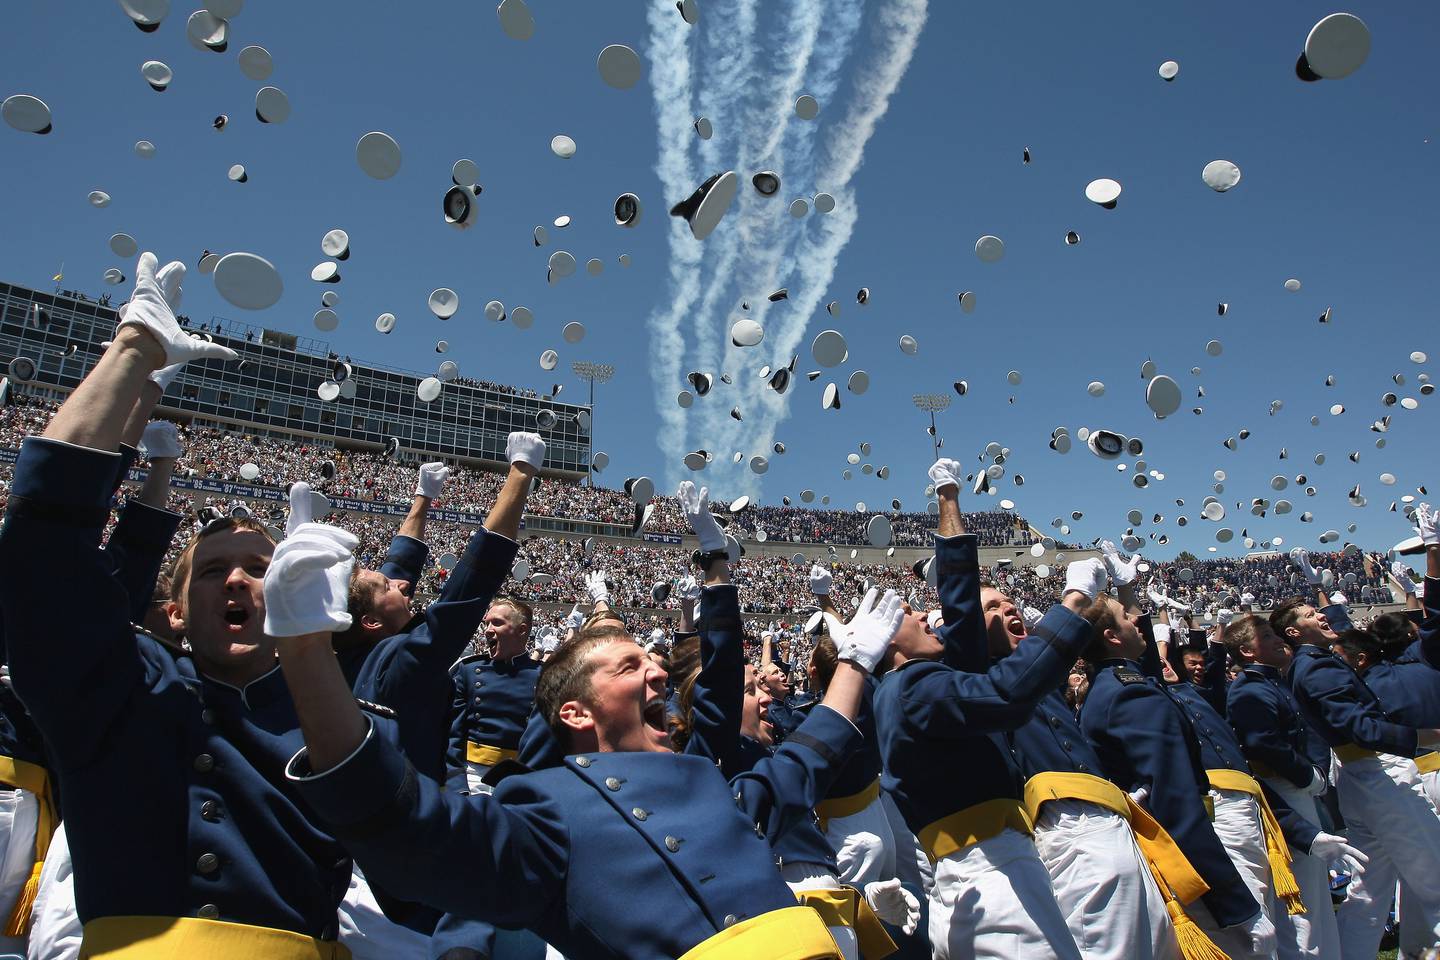 Air Force Academy graduates celebrate as a team of F-16 Thunderbirds flies over during the Air Force Academy graduation ceremony at Falcon Stadium on May 27, 2009 in Colorado Springs, Colorado. Vice President Joe Biden gave the commencement speech.